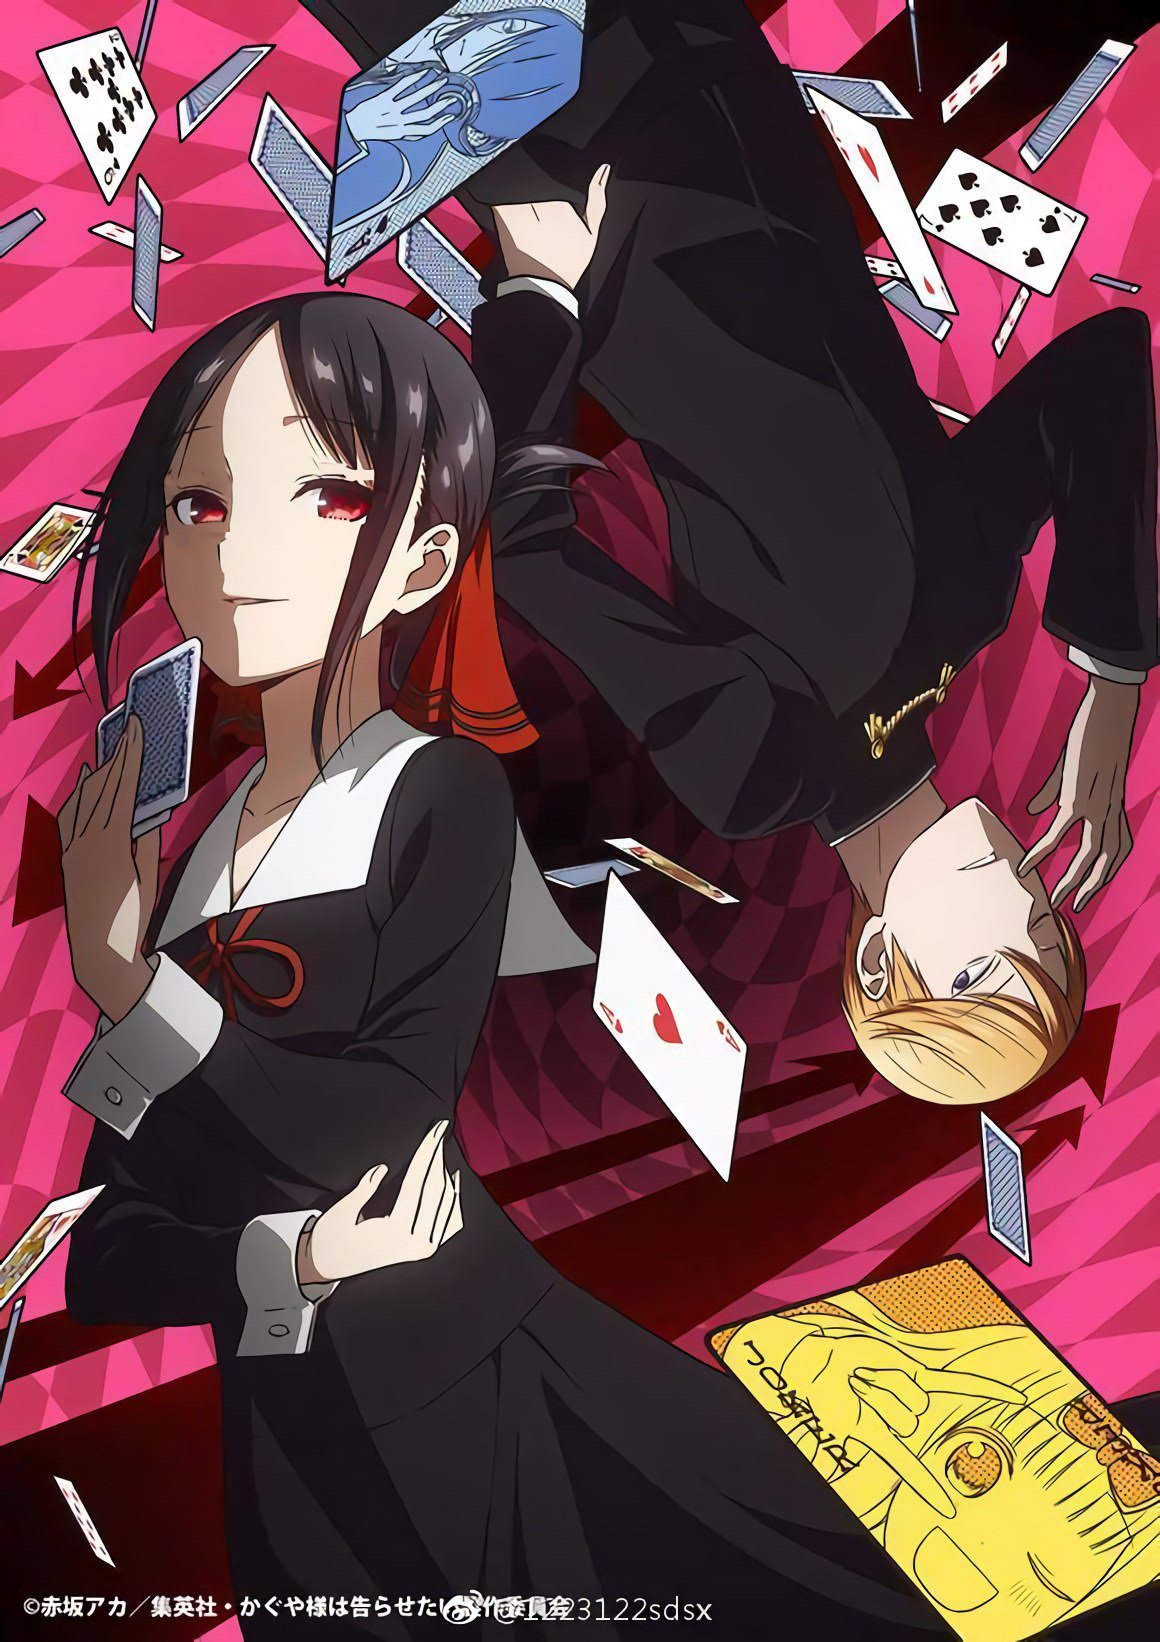 A new key visual for the TV anime âKaguya-sama wa Kokurasetai" has been unveiled. It will have its broadcast premiere in January 2019. -Synopsis-ââKaguya Shinomiya and Miyuki Shirogane are the members of the incredibly prestigious Shuichi'in...